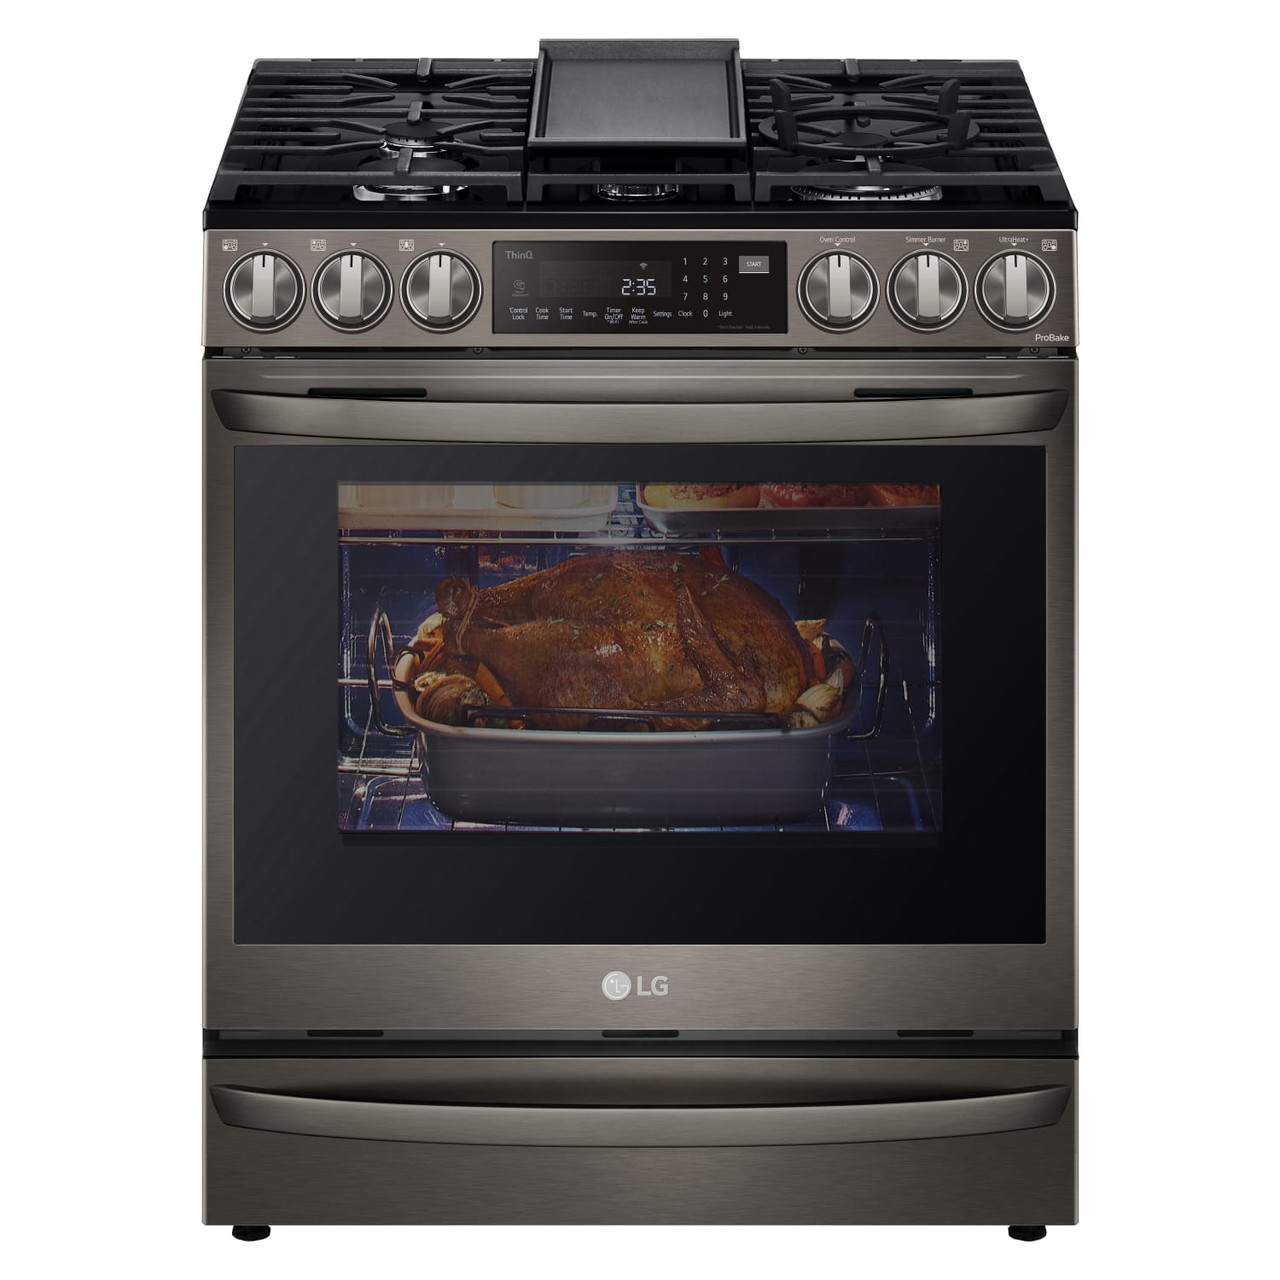 LG 6.3 cu. ft. Smart Wi-Fi Enabled ProBake Convection InstaView Gas Slide-in Range with Air Sous-Vide -LSGL6337D